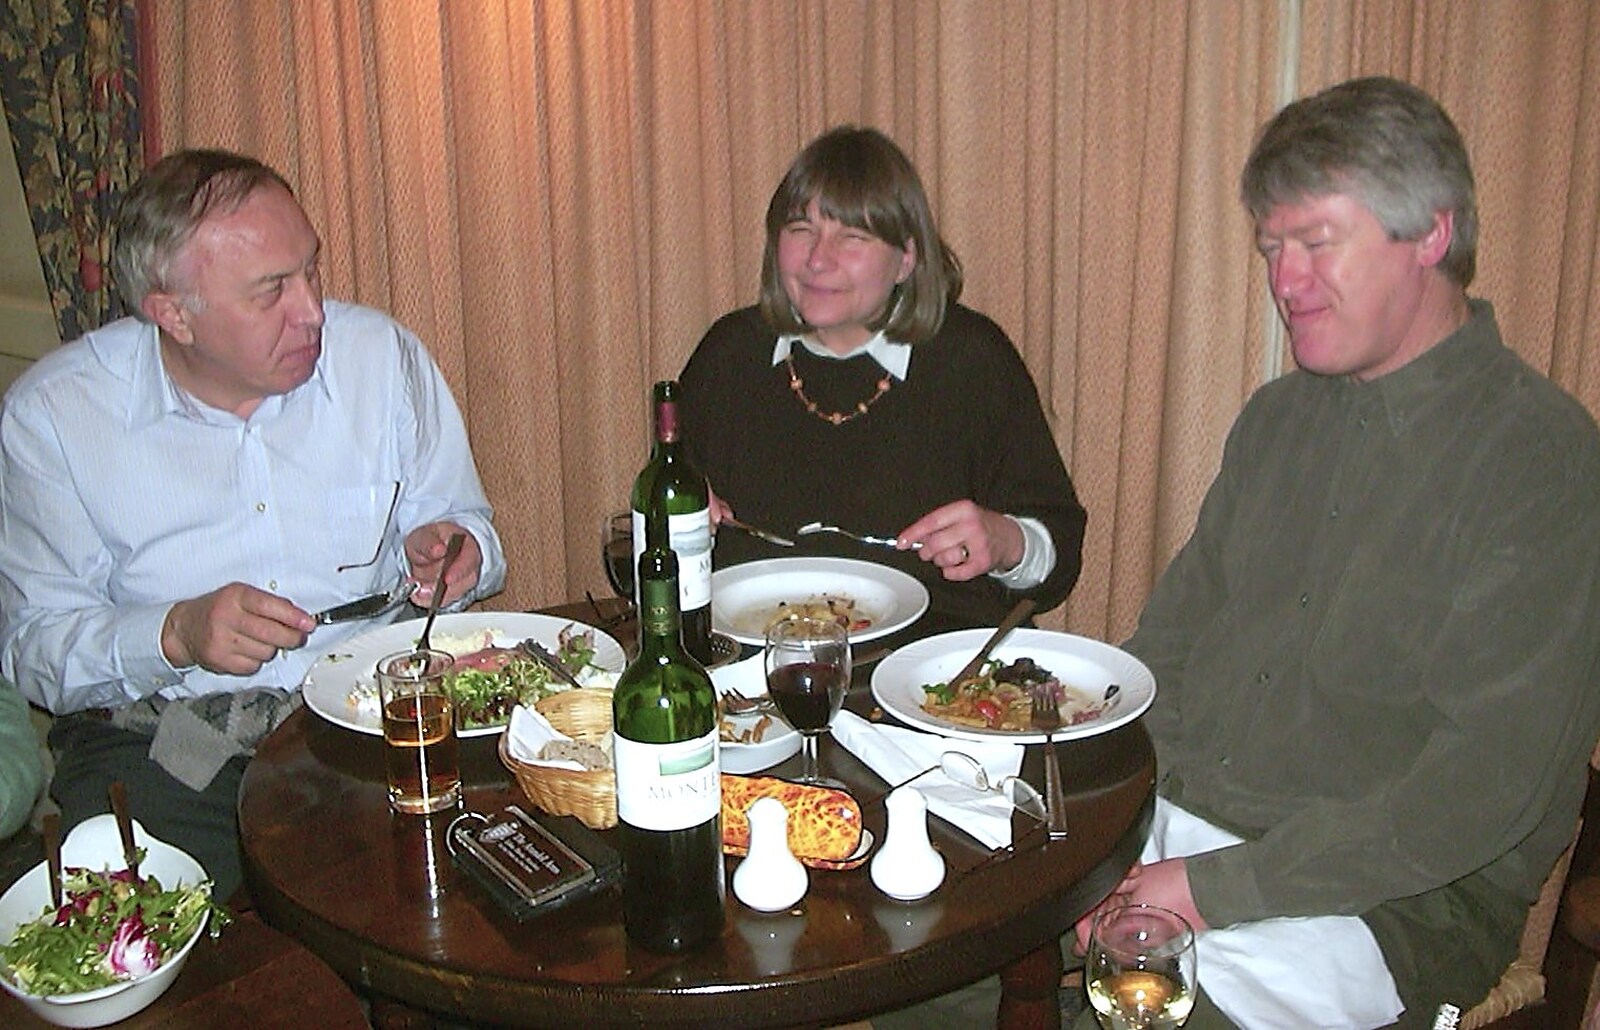 Bruno, Caroline and Neil from Sis's Nearly-Christmas Wedding, Meavy, Dartmoor - 20th December 2003